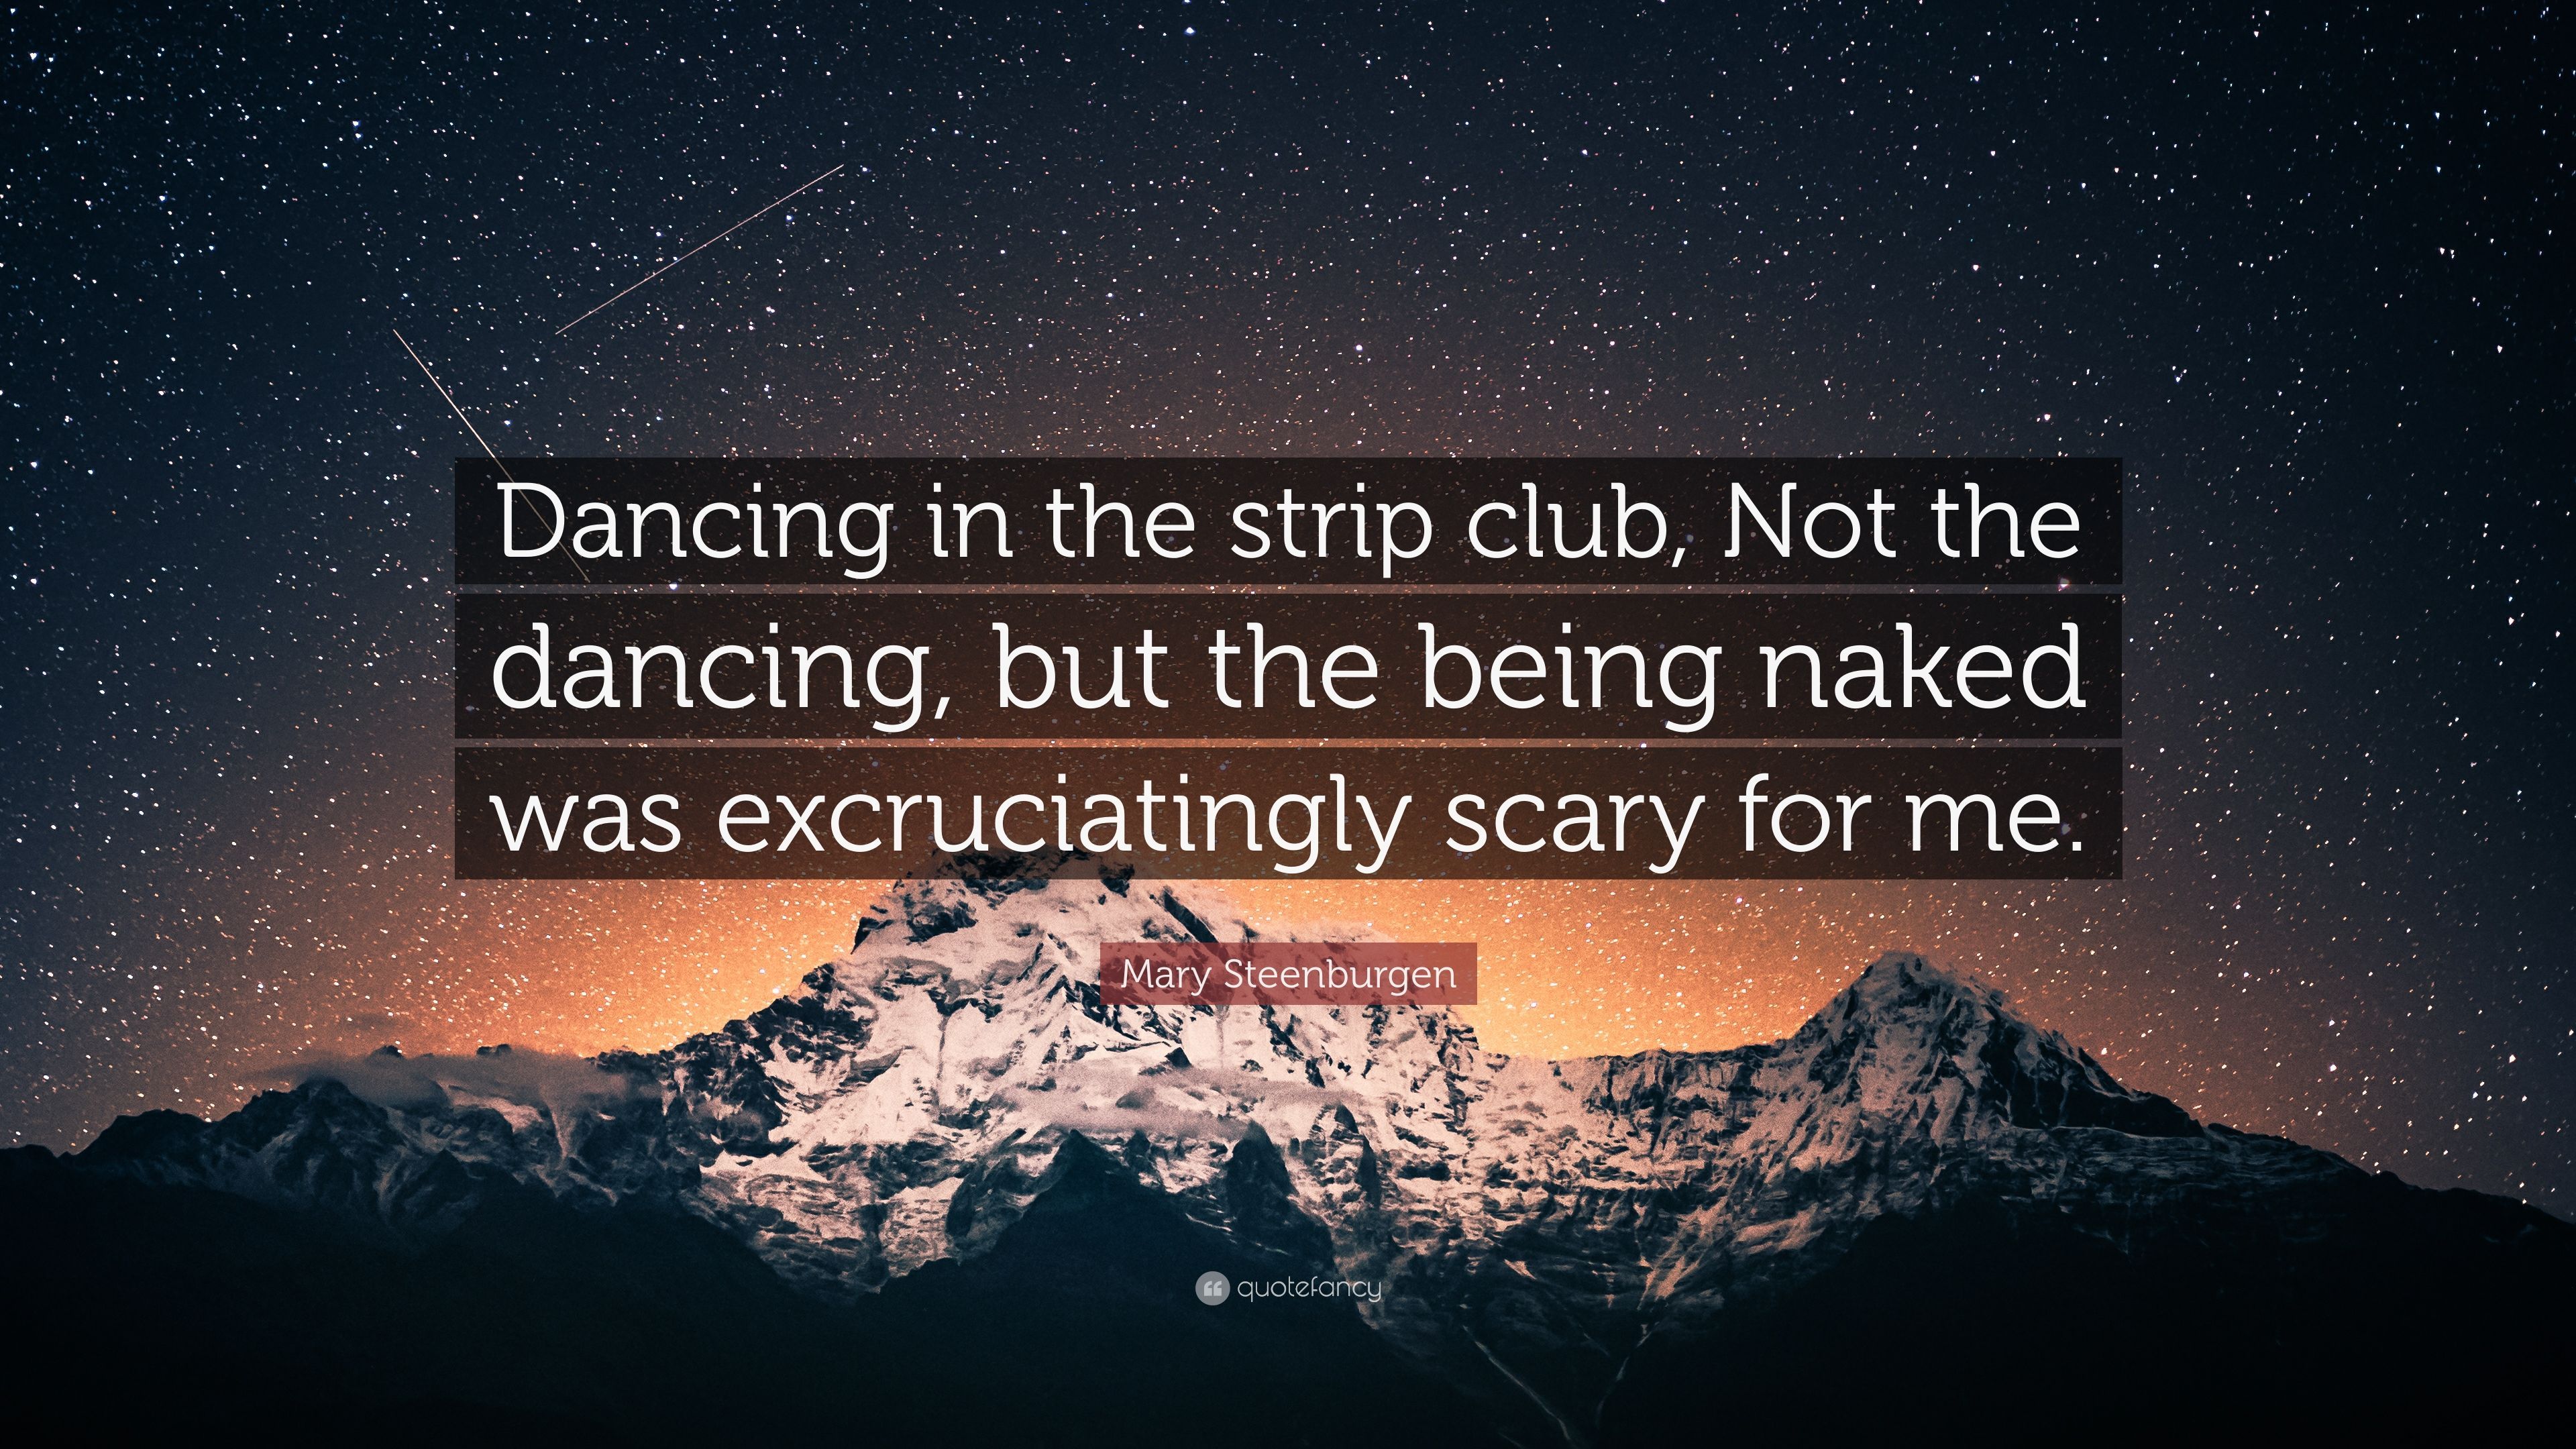 Mary Steenburgen Quote: “Dancing in the strip club, Not